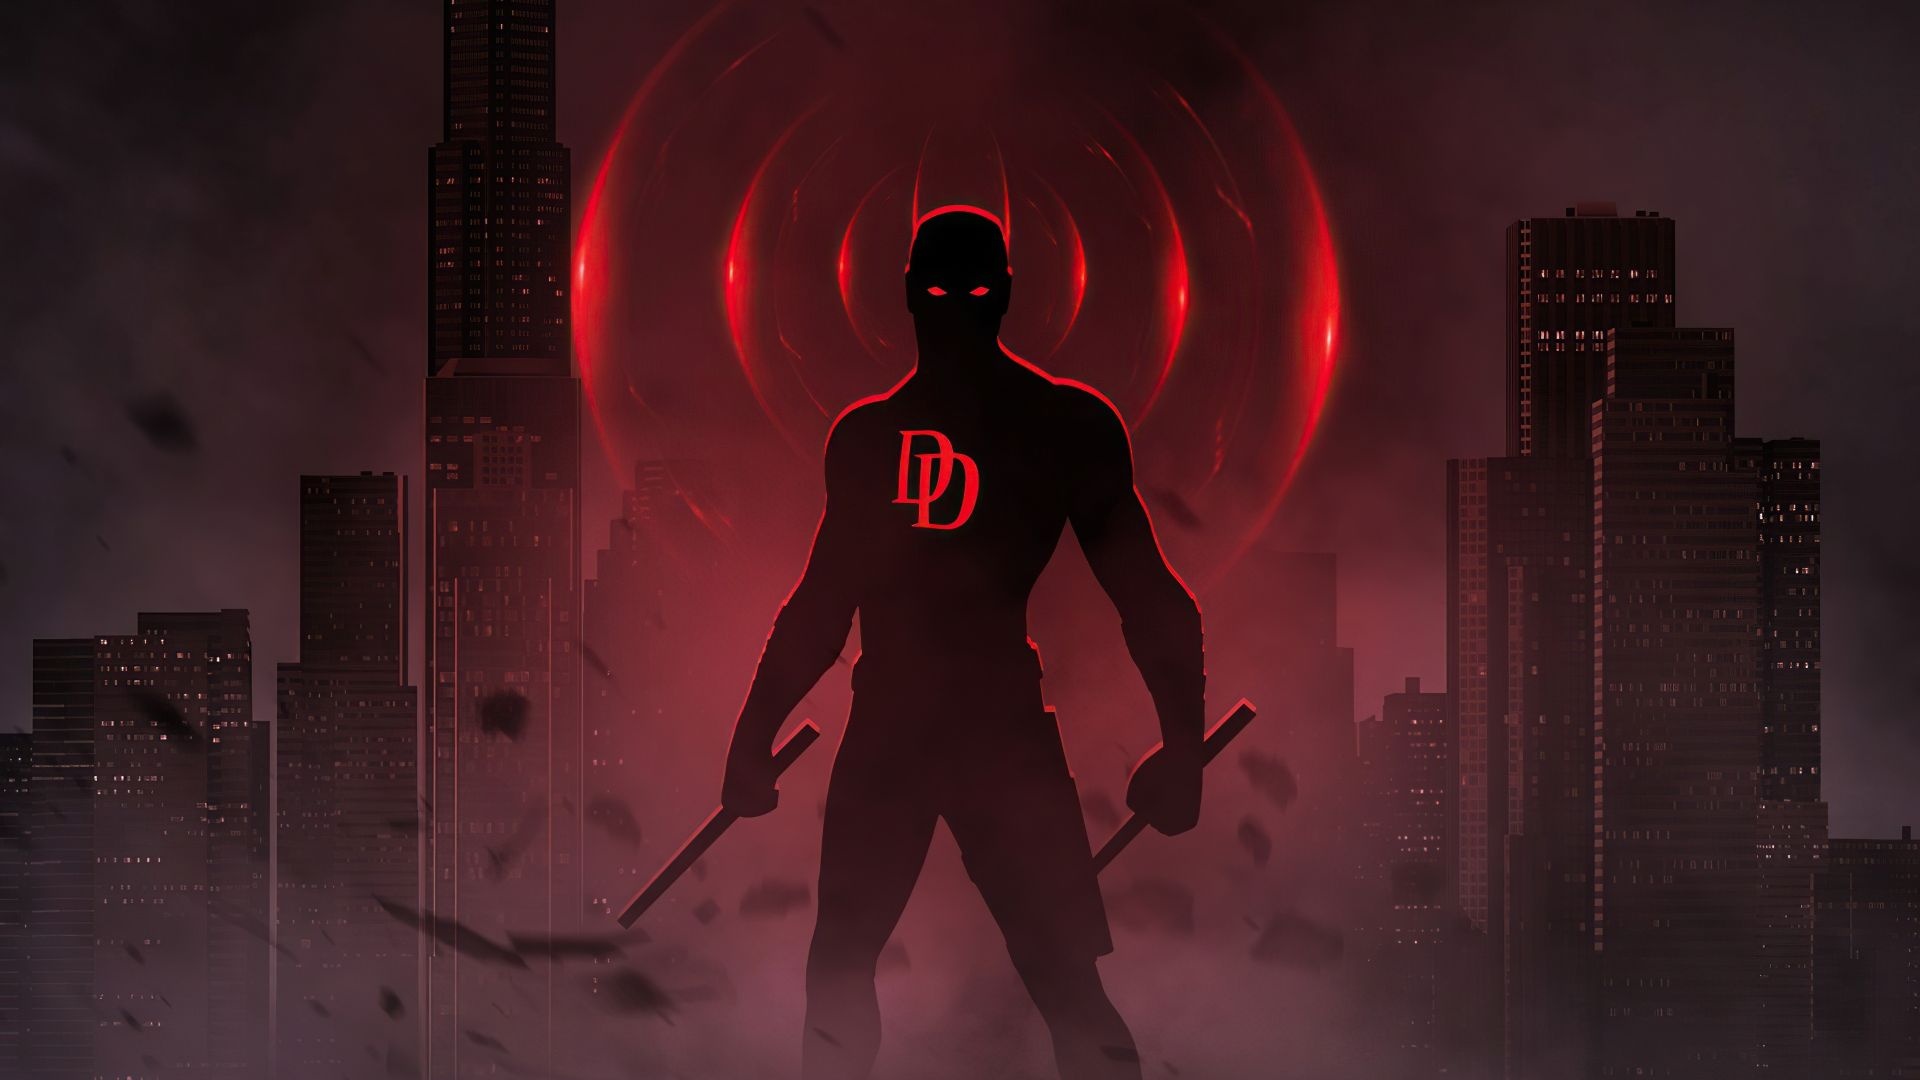 Daredevil HD wallpapers, Comic book images, Action-packed scenes, 1920x1080 Full HD Desktop